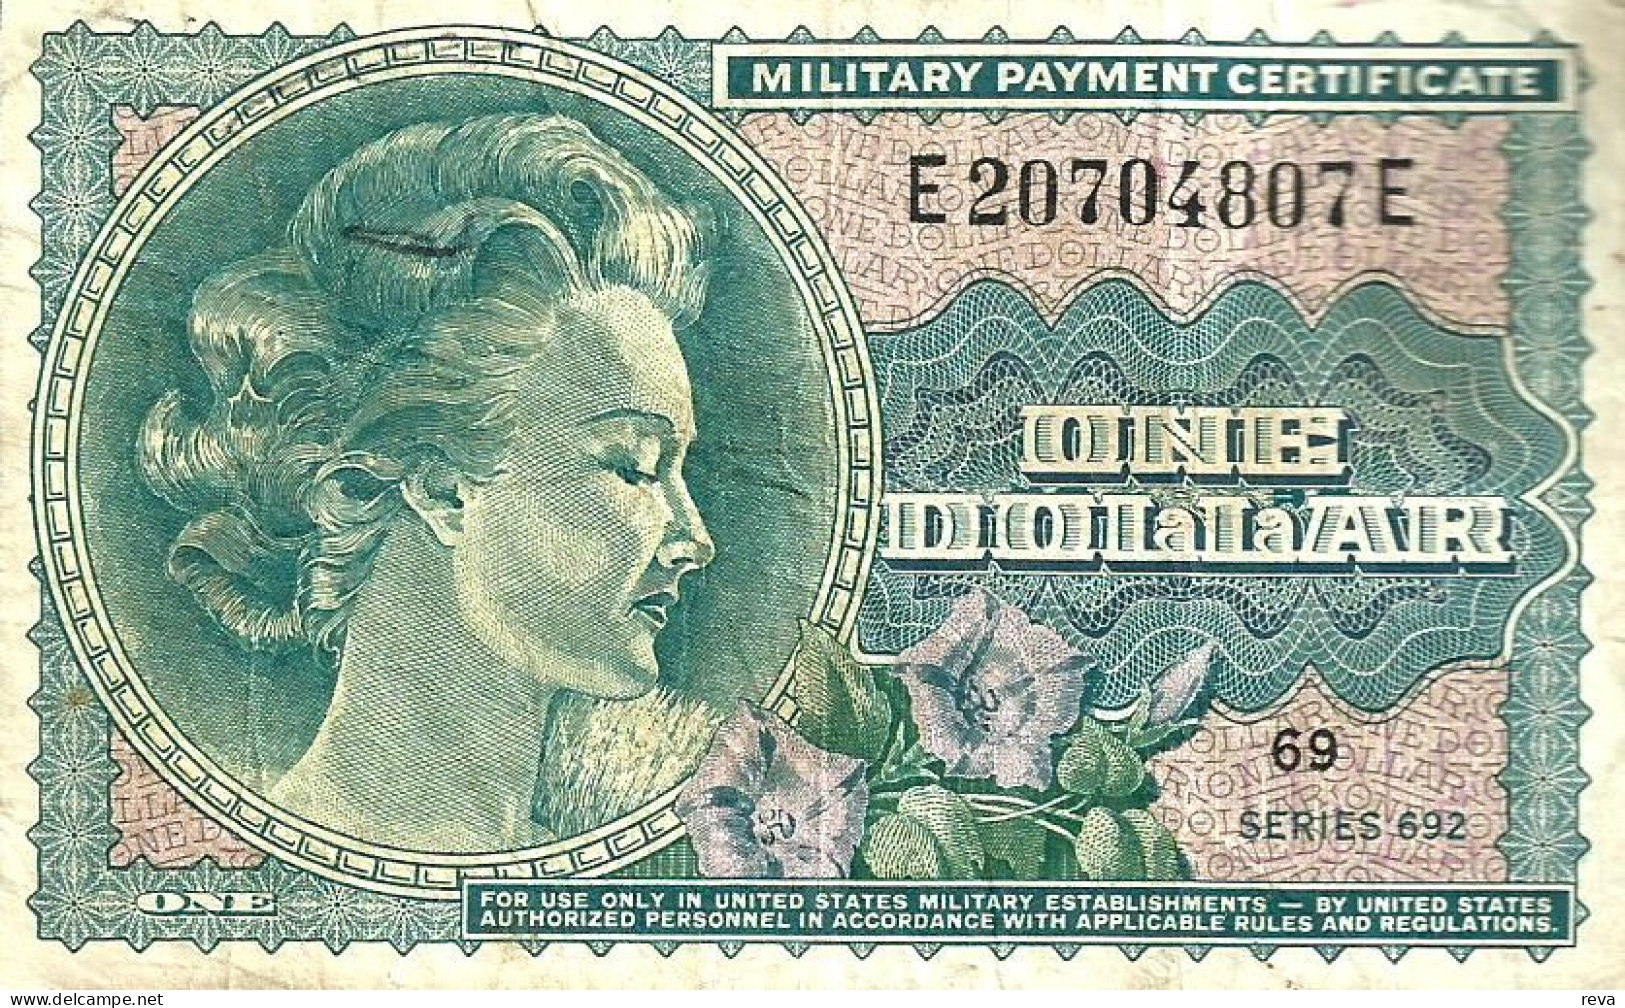 USA UNITED STATES $1 MILITARY CERTIFICATE GREEN WOMAN SERIES 692 VF ND(1970) PM93a READ DESCRIPTION CAREFULLY !! - 1970 - Series 692